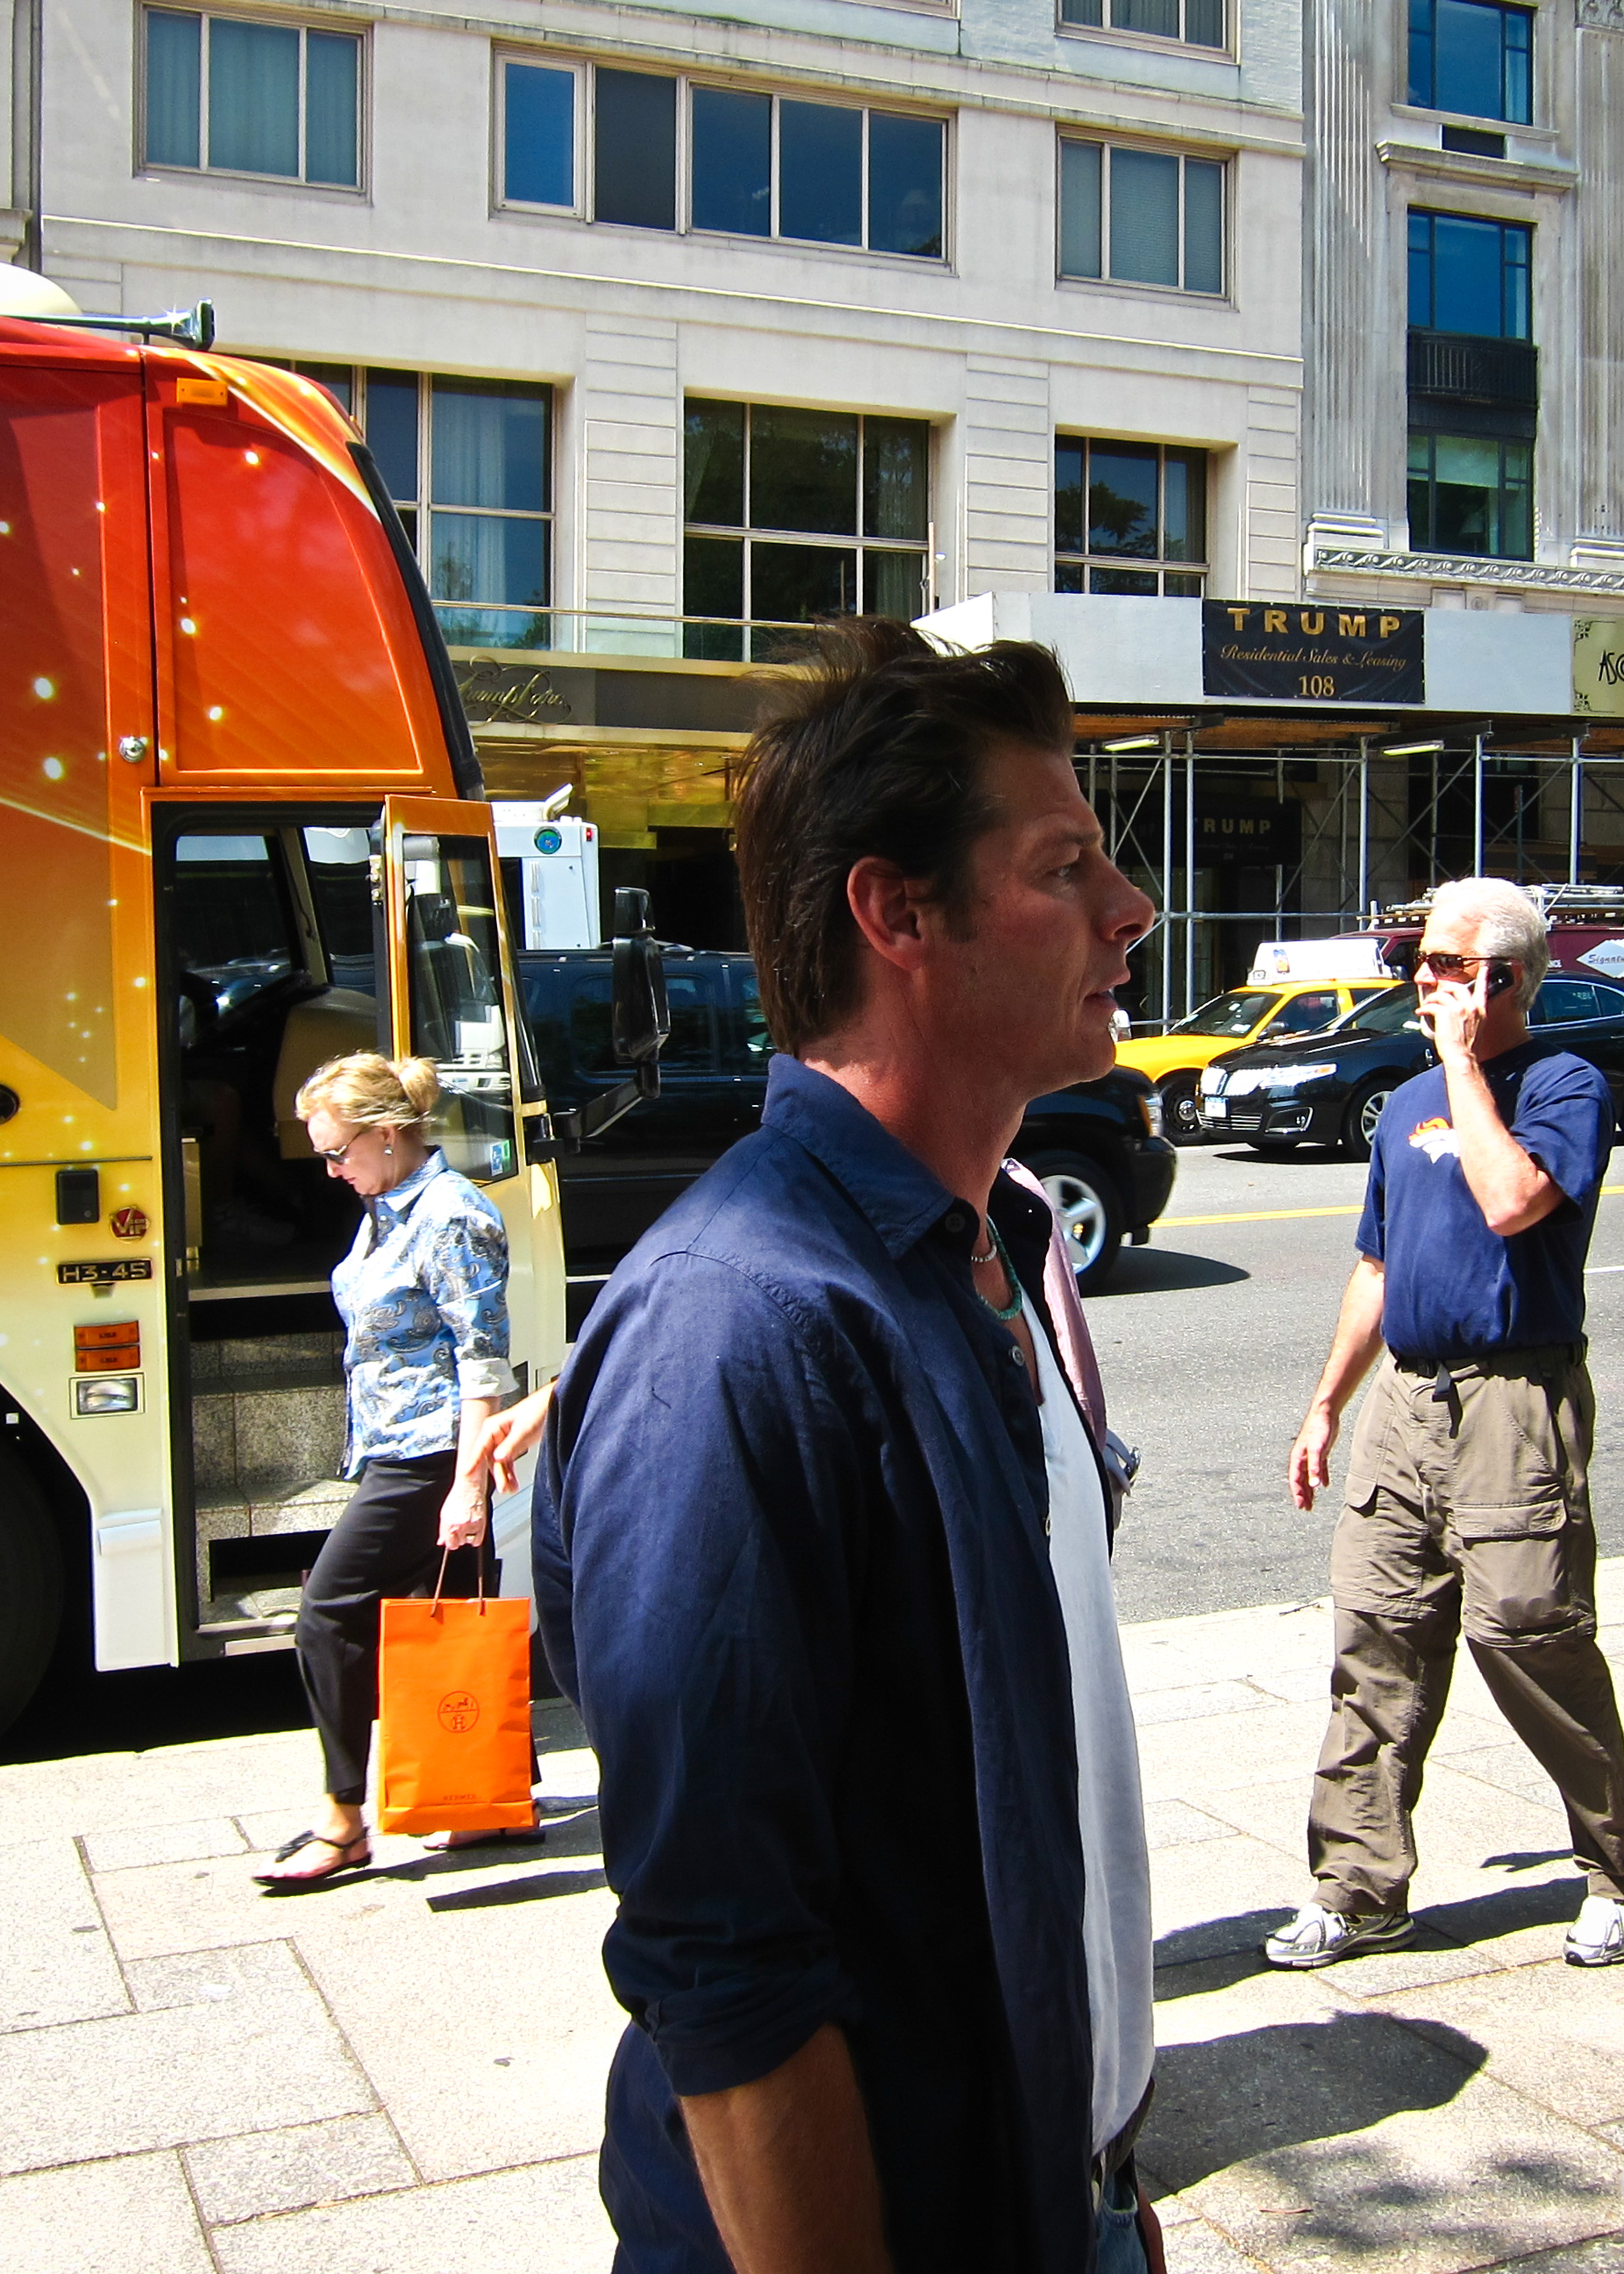 File Ty Pennington Near The Extreme Home Makeover Bus Nyc Jpg Wikimedia Commons